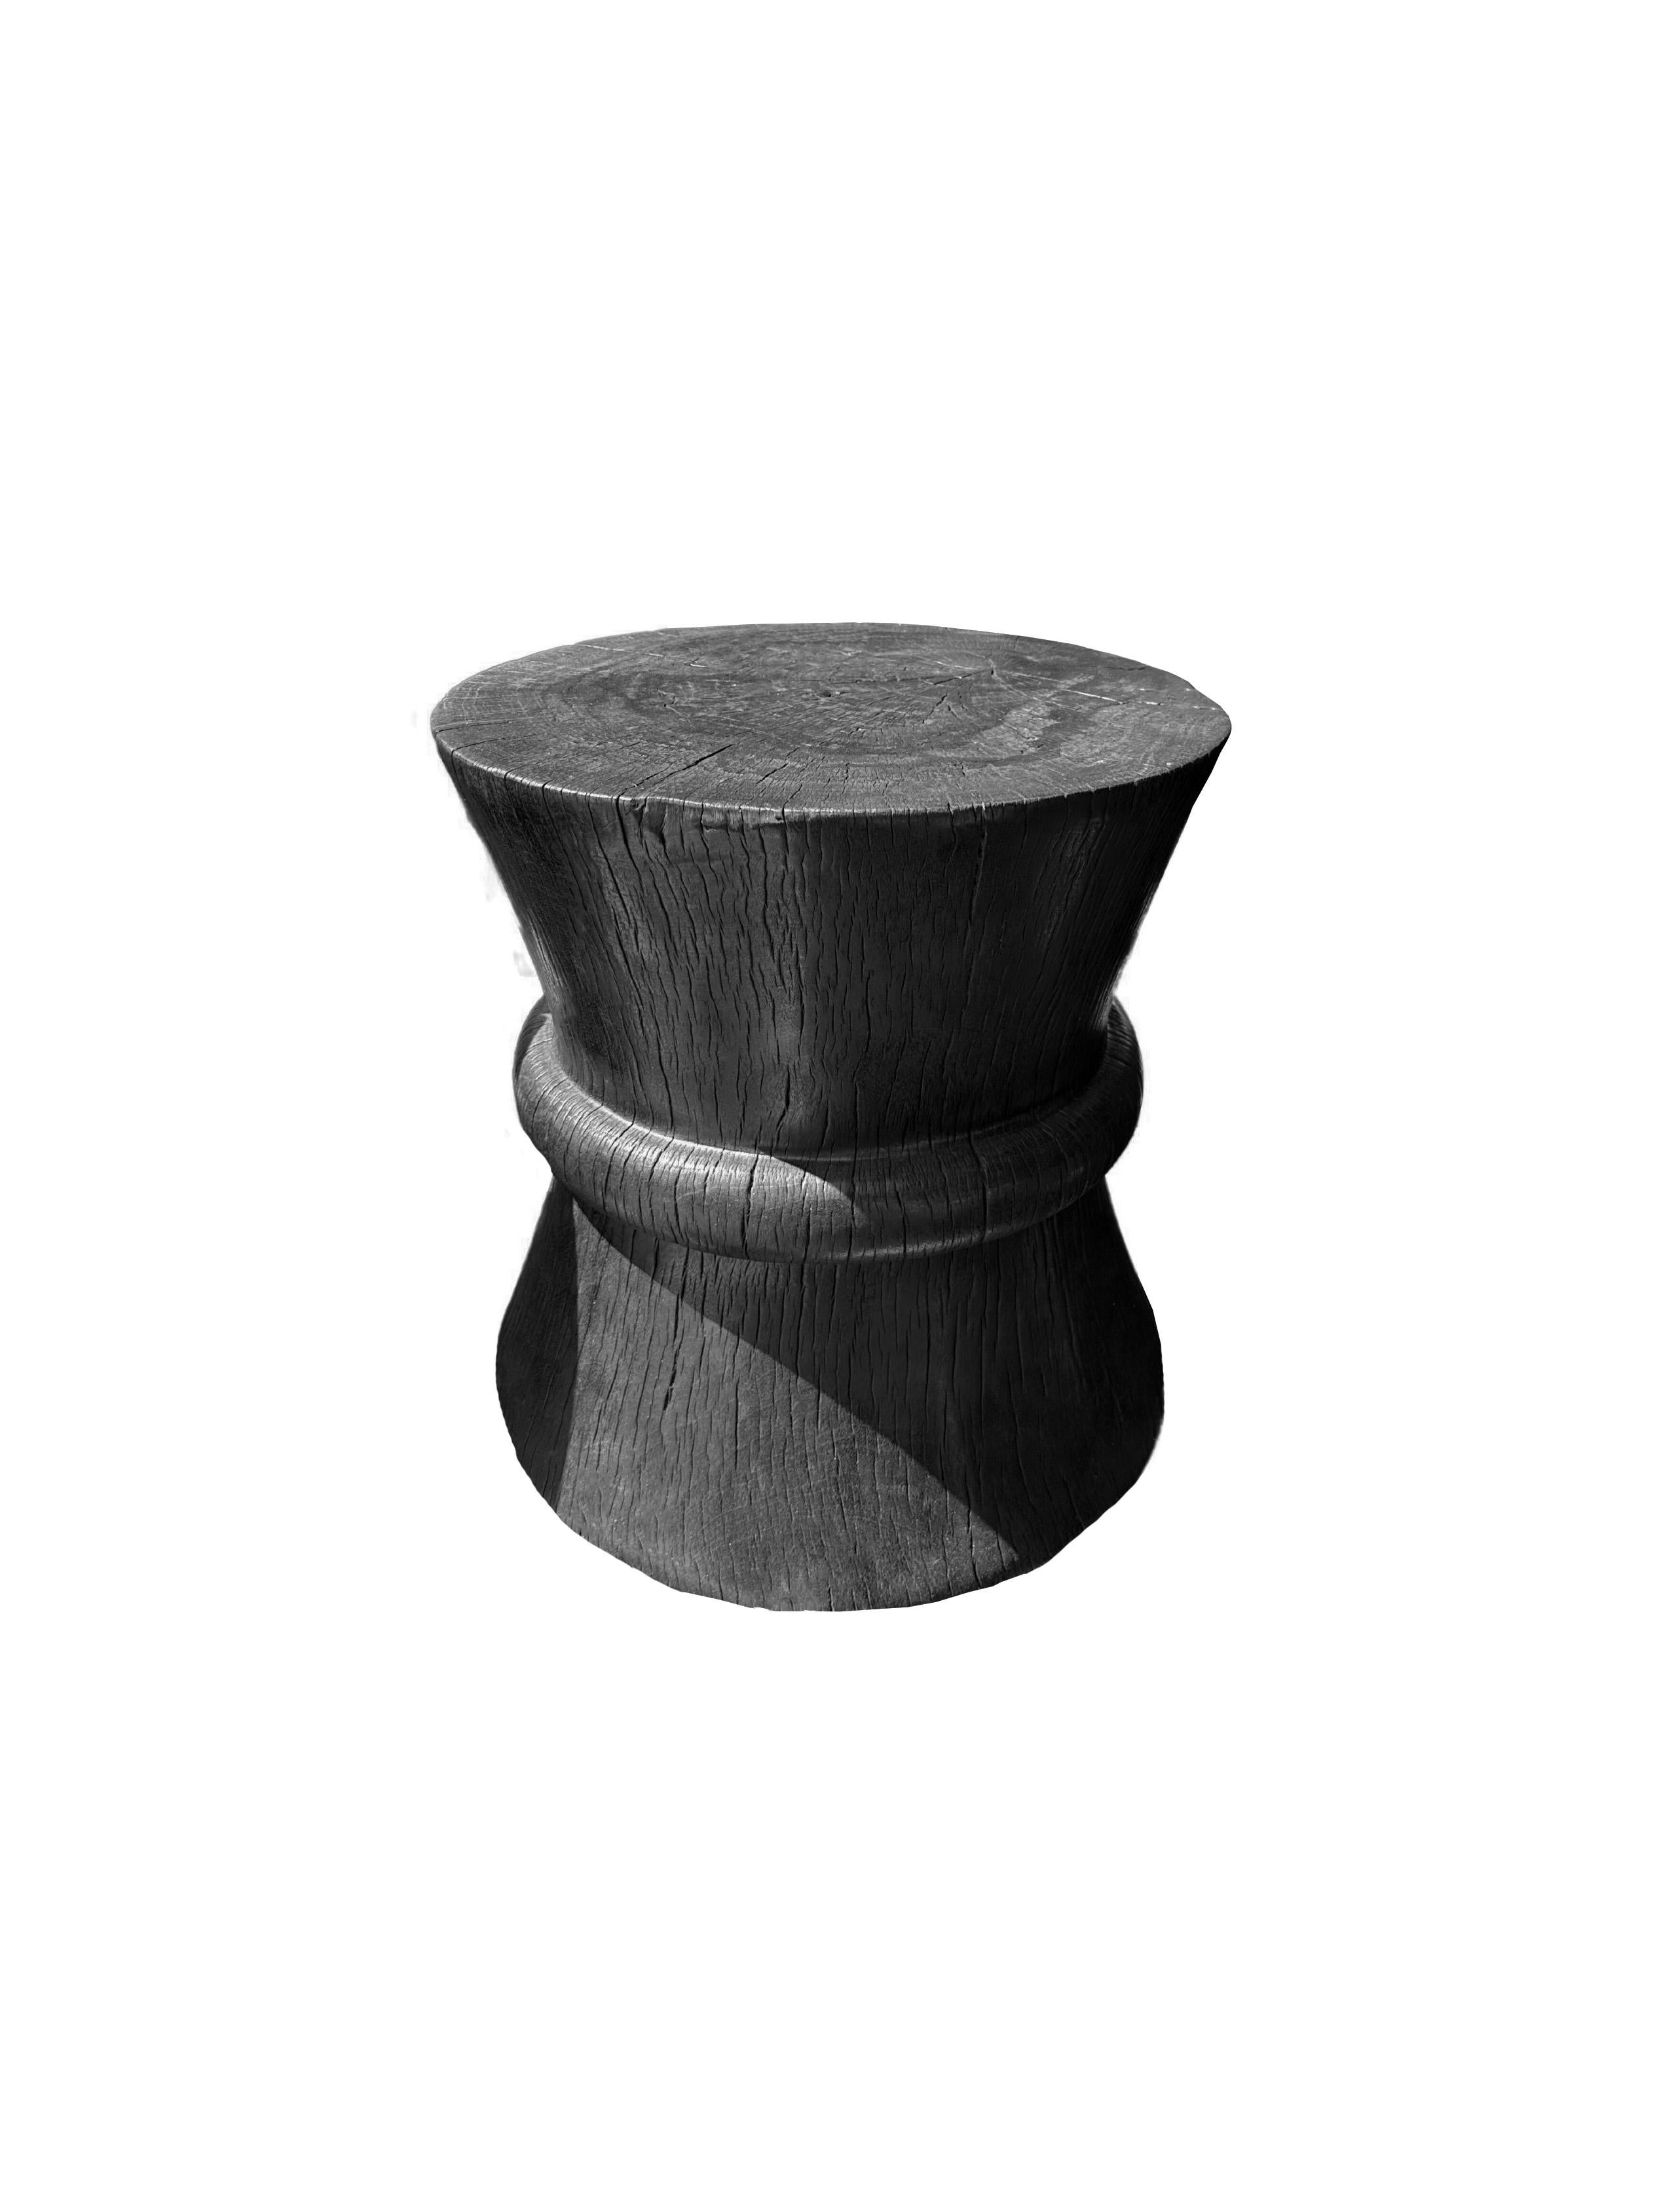 A wonderfully sculptural round side table. Its black pigment was achieved through a burning process creating both a wonderful color and effect. Its neutral pigment and wood texture makes it perfect for any space. A uniquely sculptural and versatile